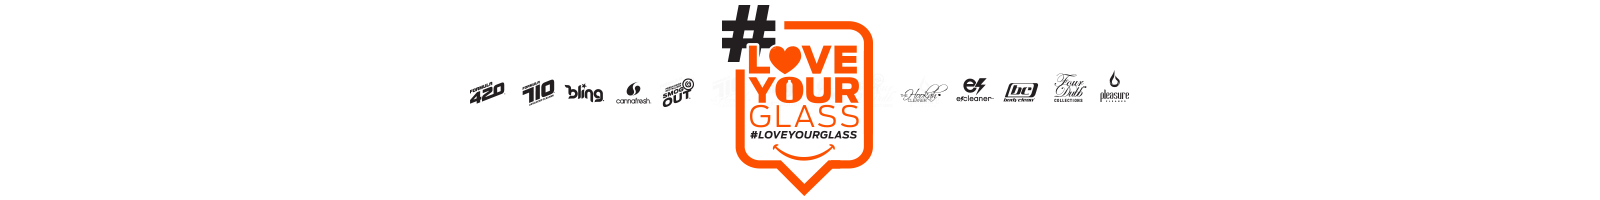 LOVEYOURGLASS